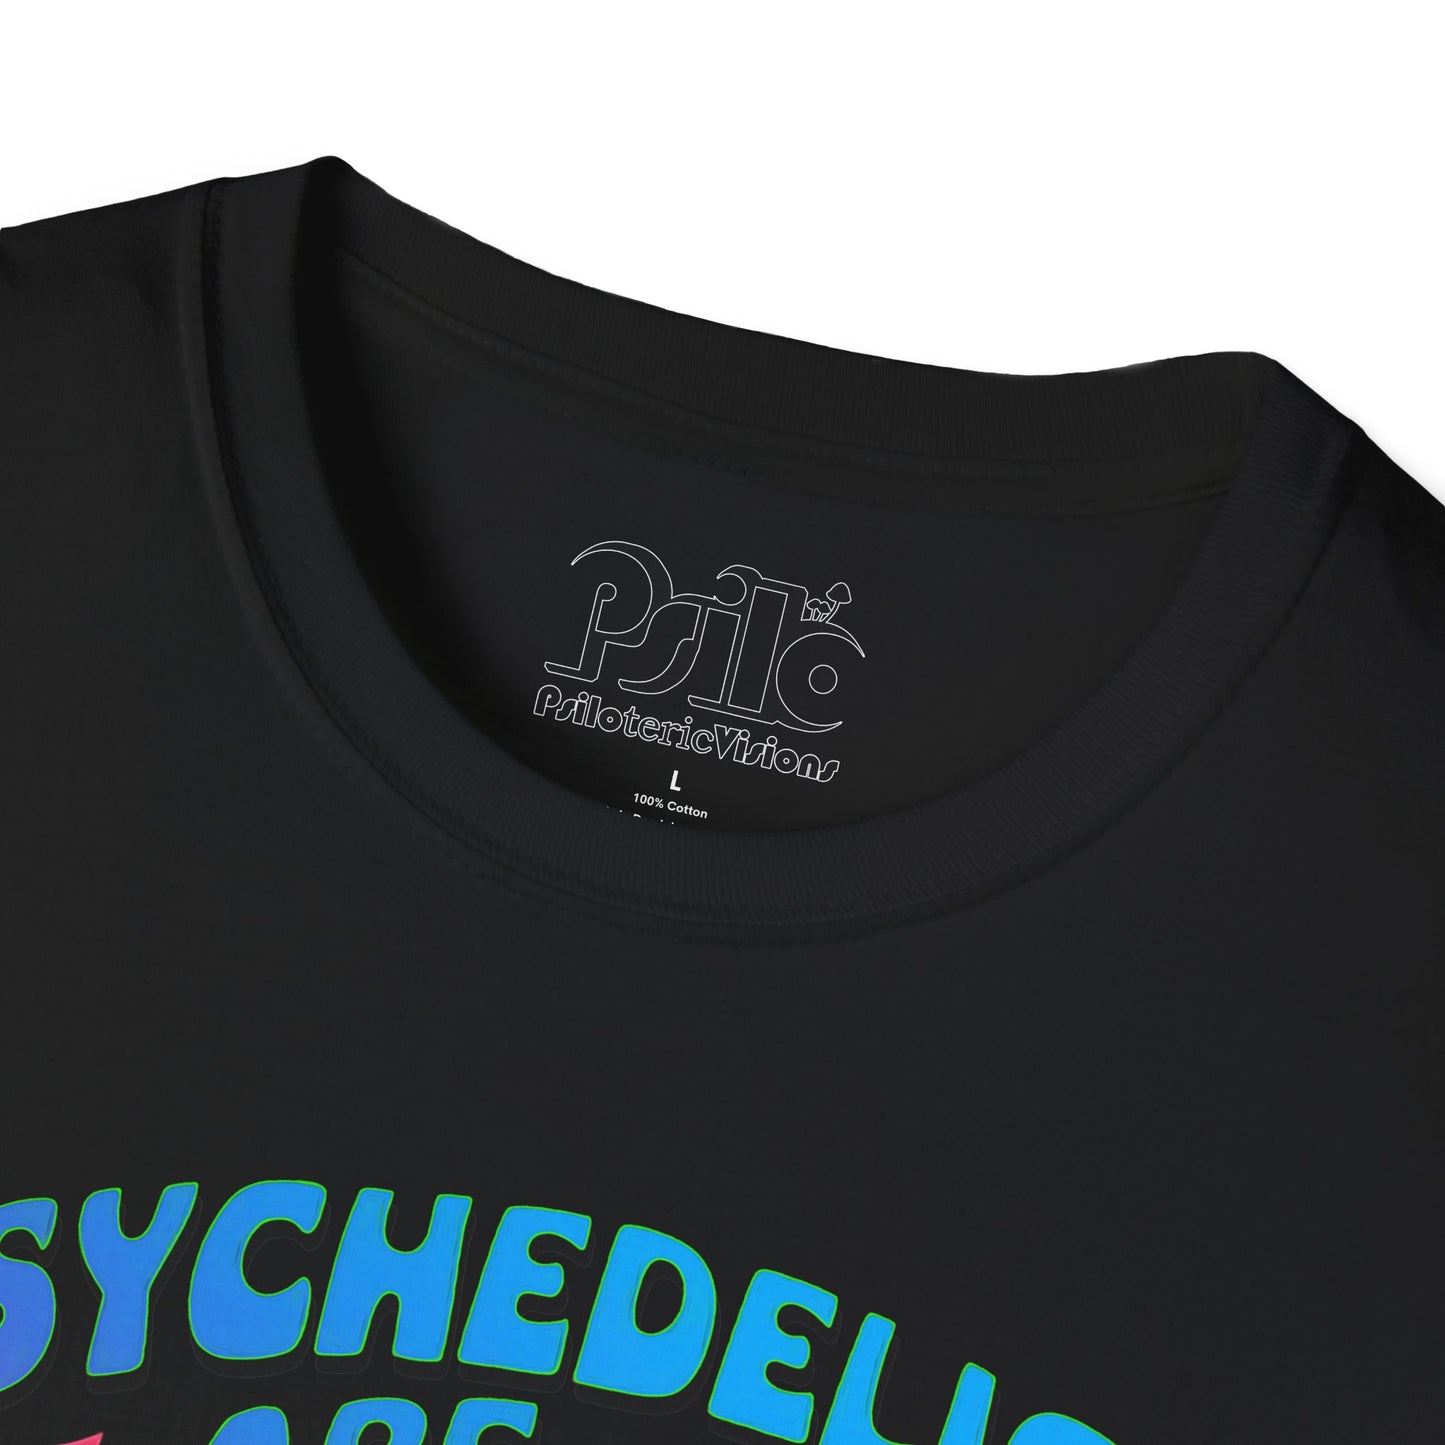 "Psychedelics Are Awesome" Unisex SOFTSTYLE T-SHIRT